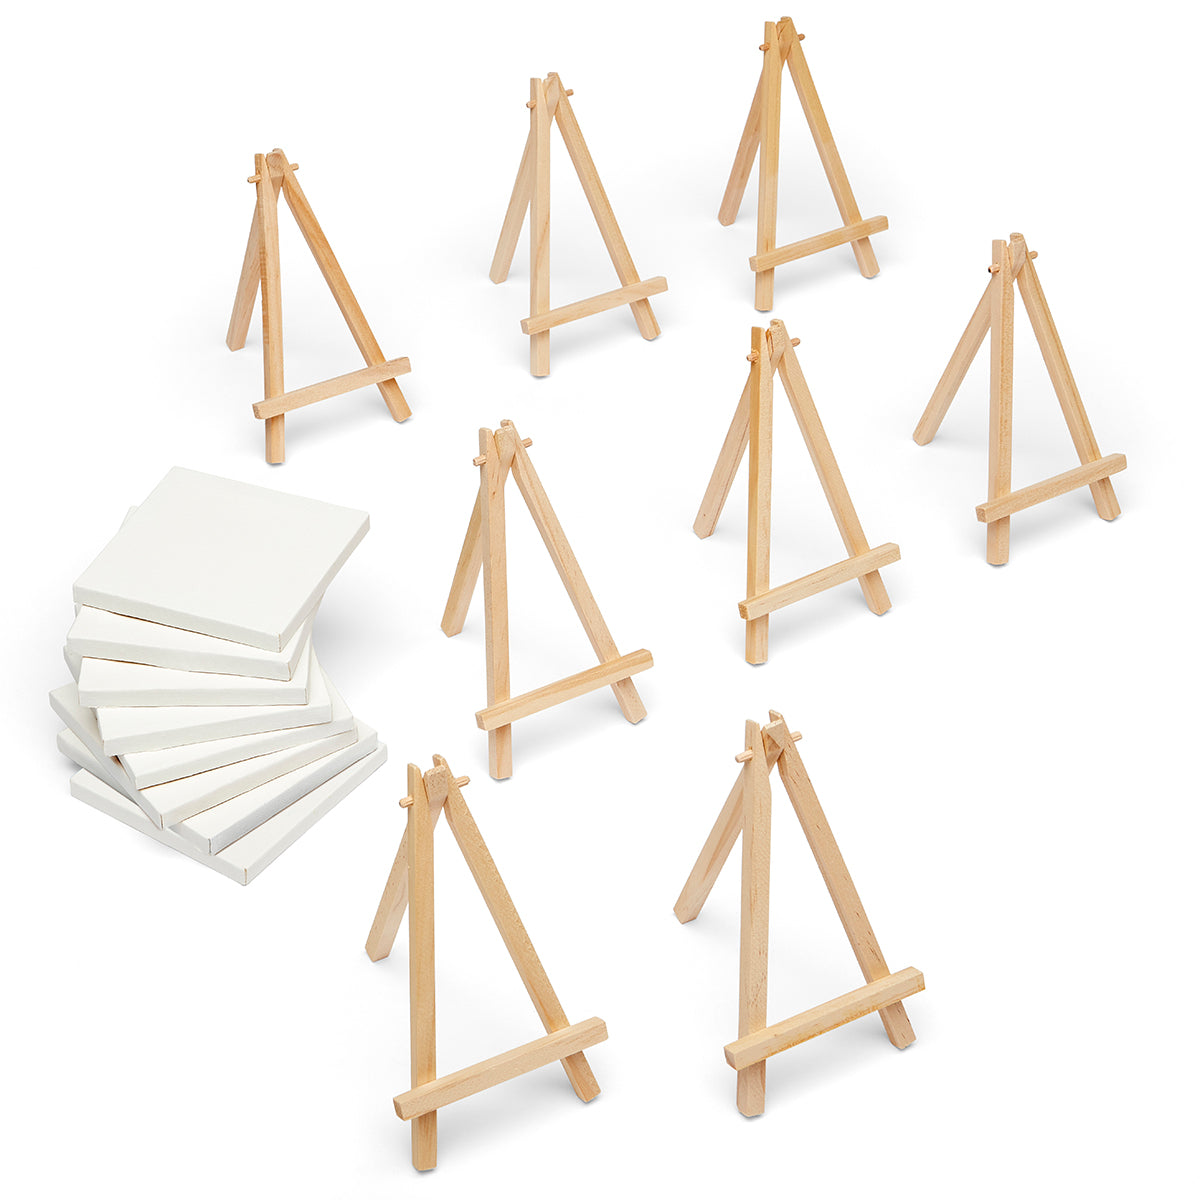 4 By 4 Inch Mini Canvas And 8*16cm Mini Wood Easel Set For Painting Drawing  School Student Artist S